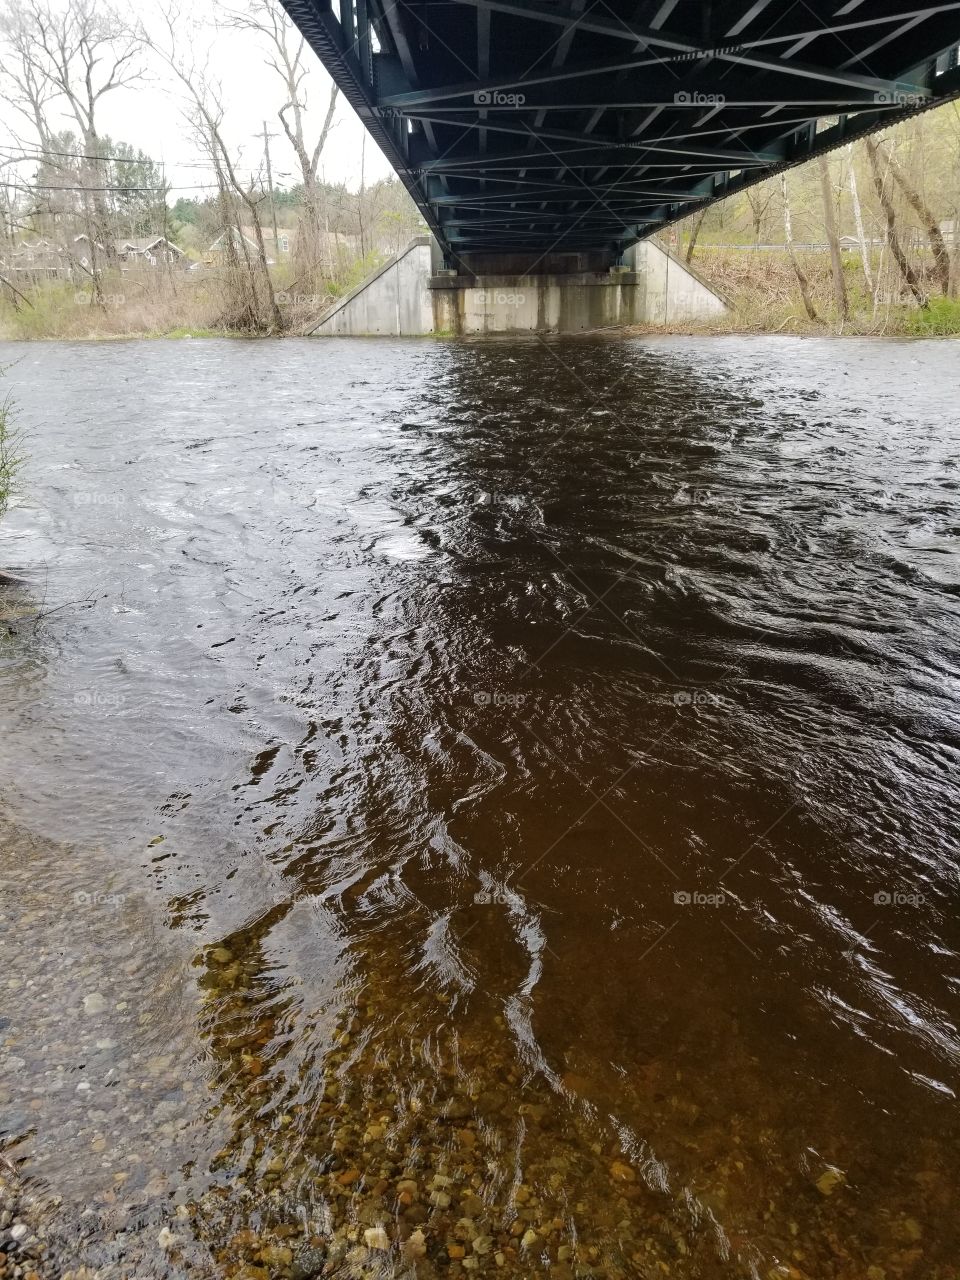 Hiking in Connecticut